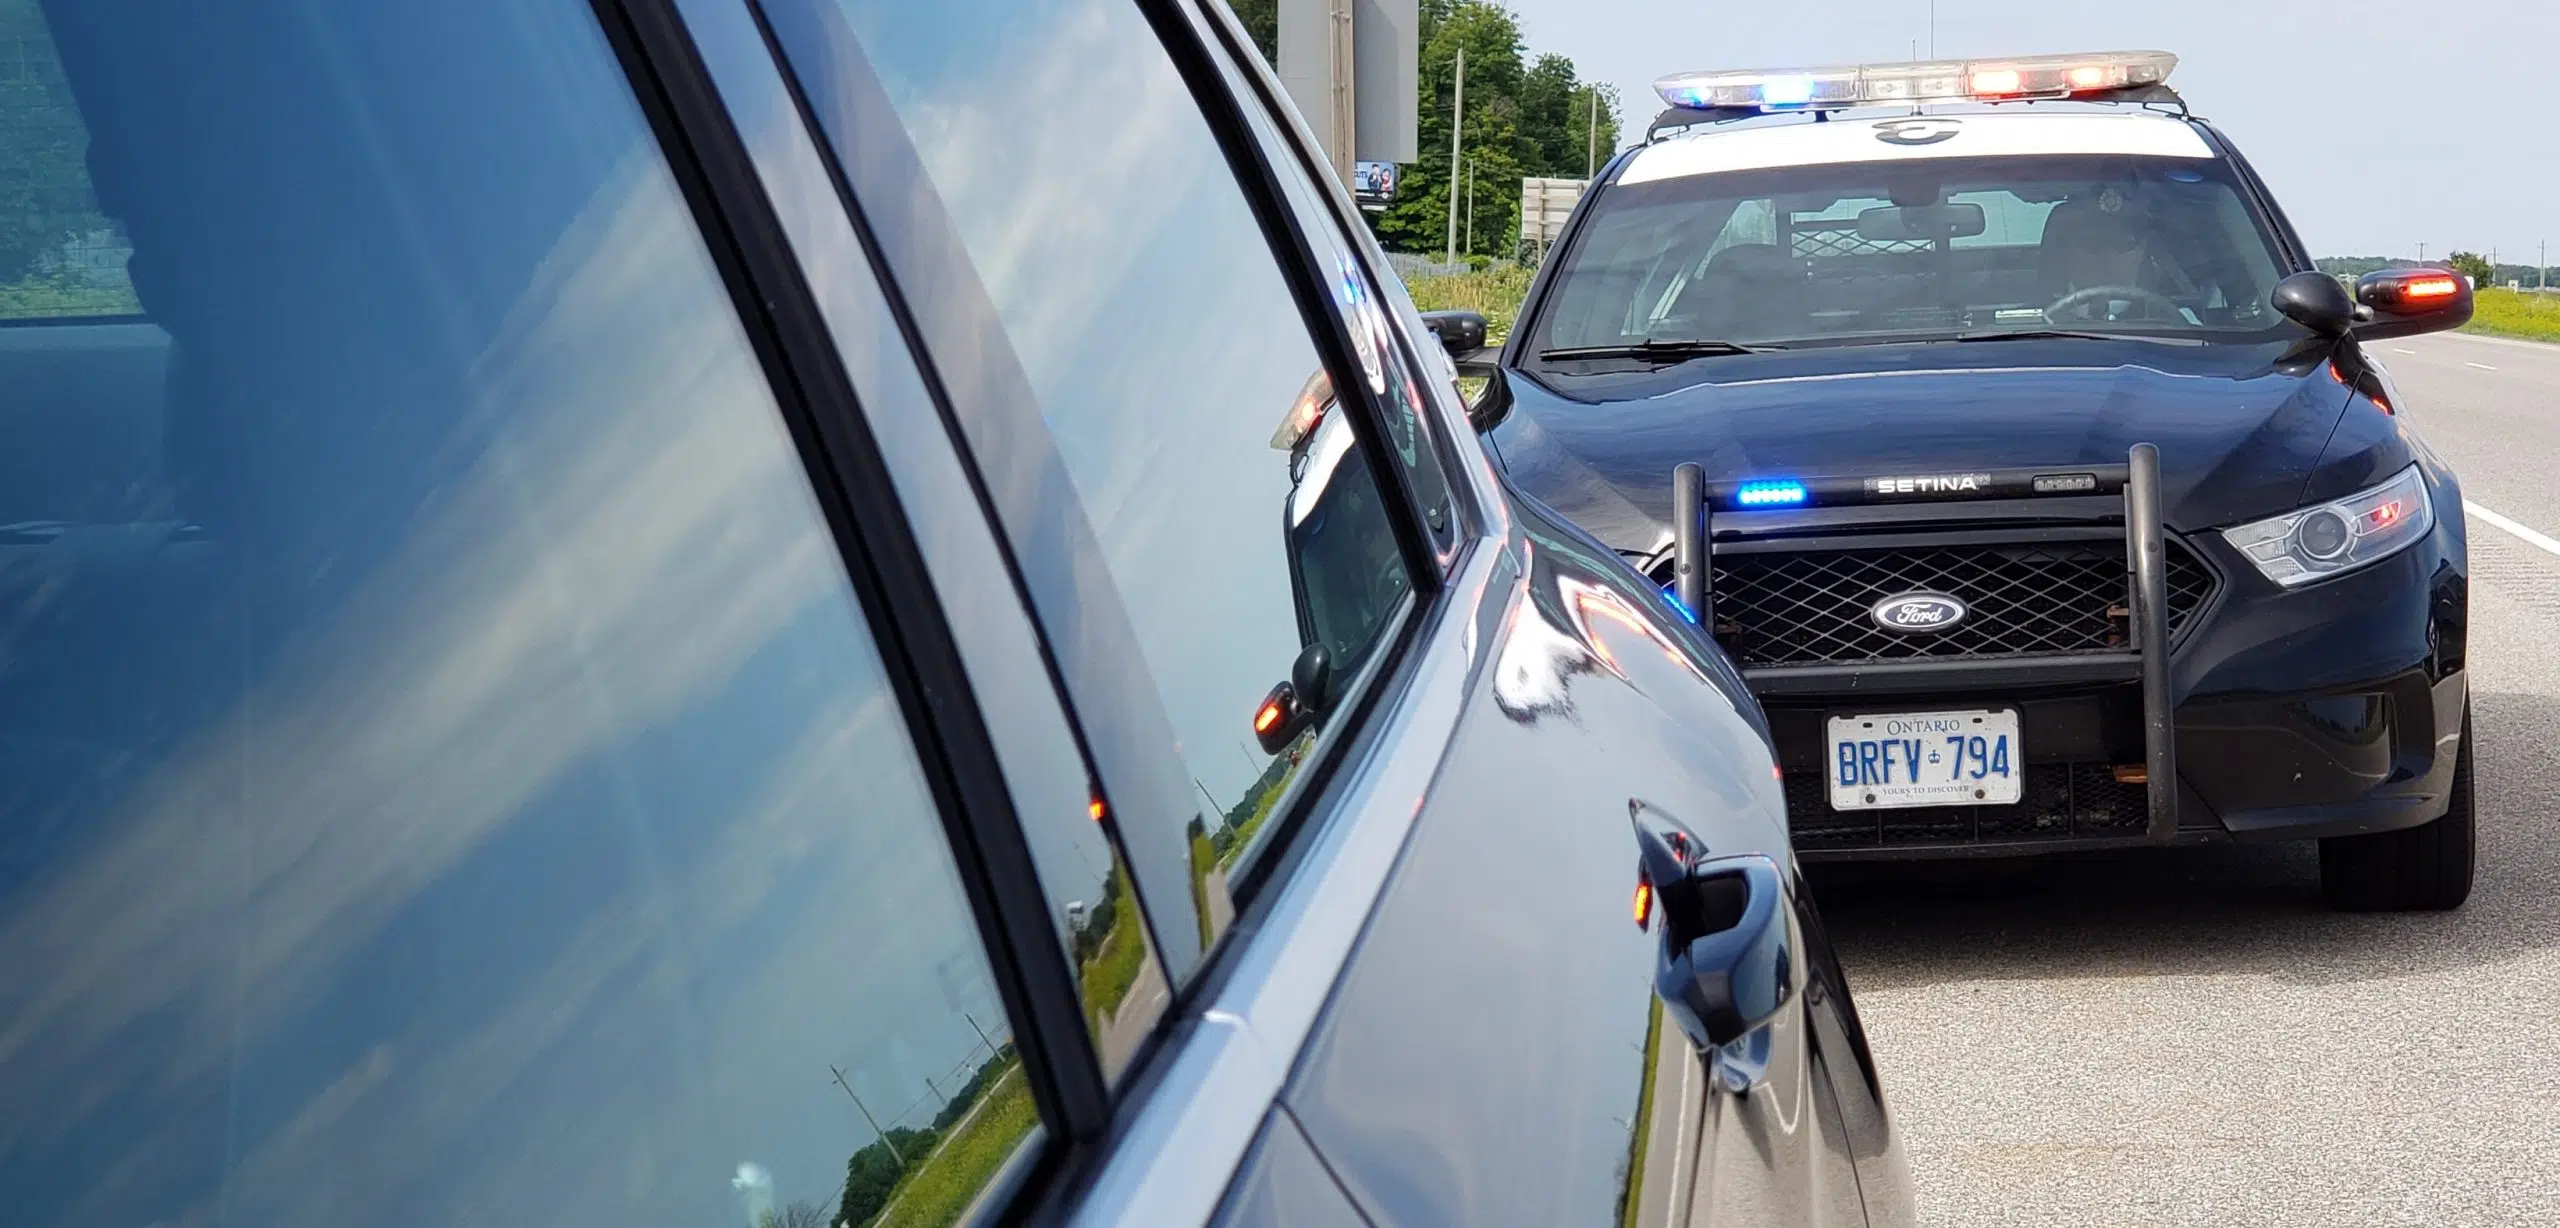 OPP charge two men after traffic stop last week